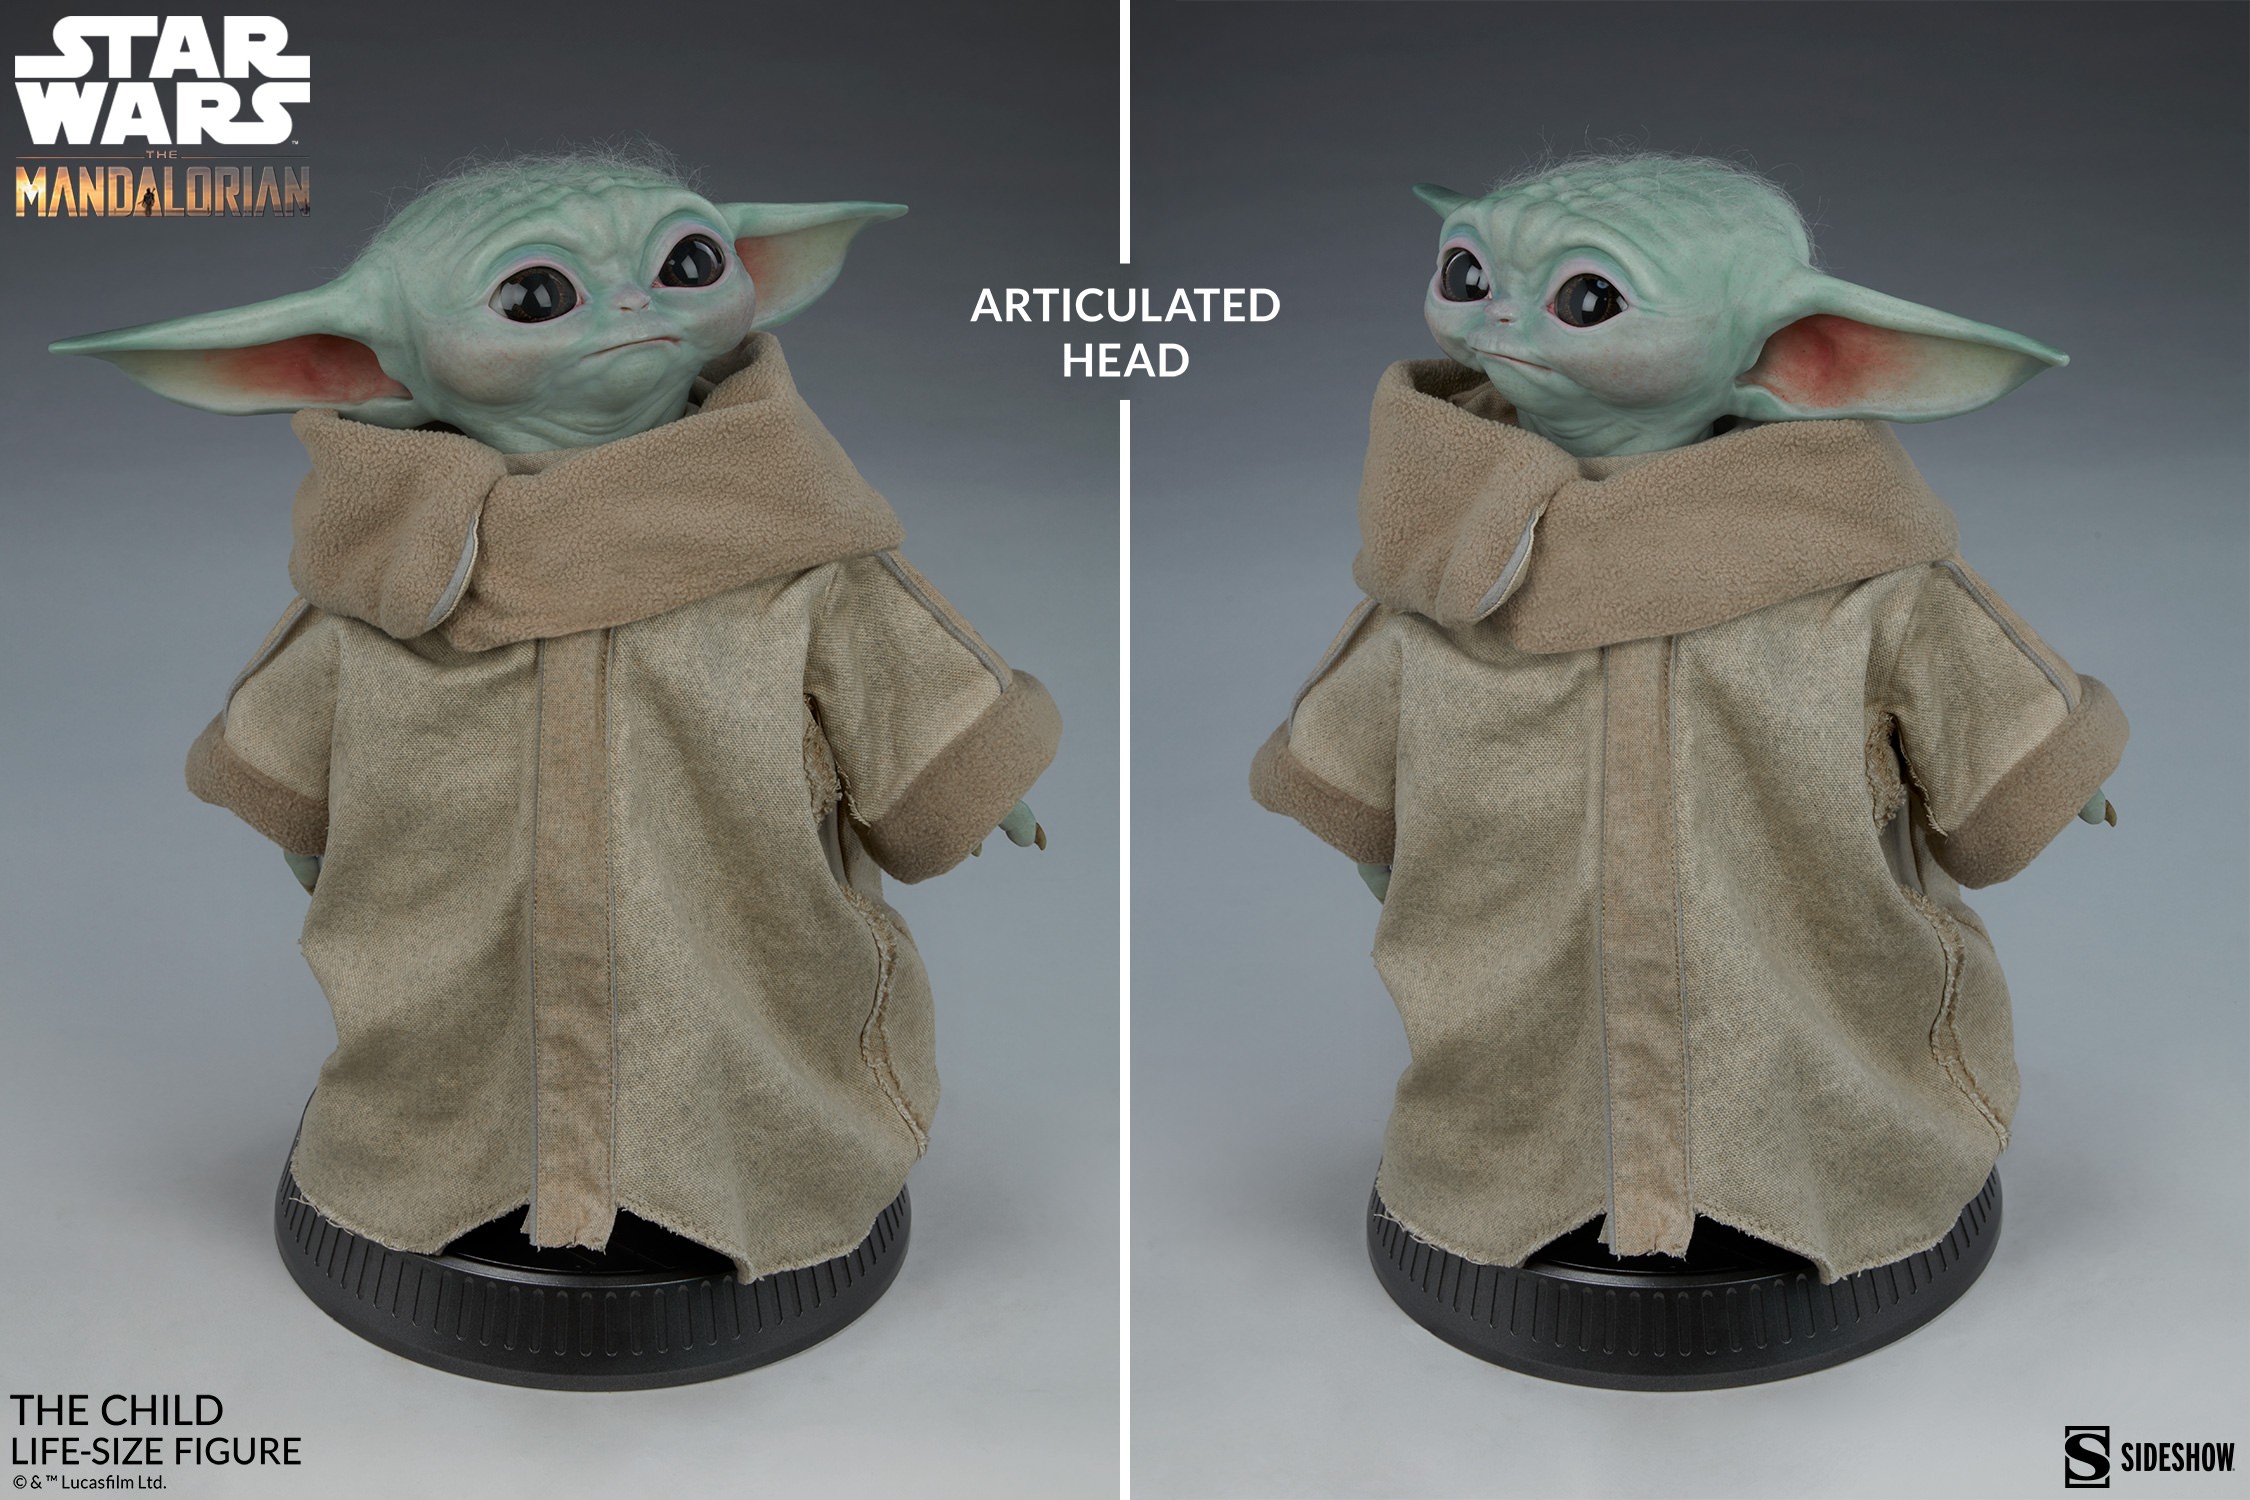 The Child Sideshow Life size figure. Figurine taille réelle Baby Yoda